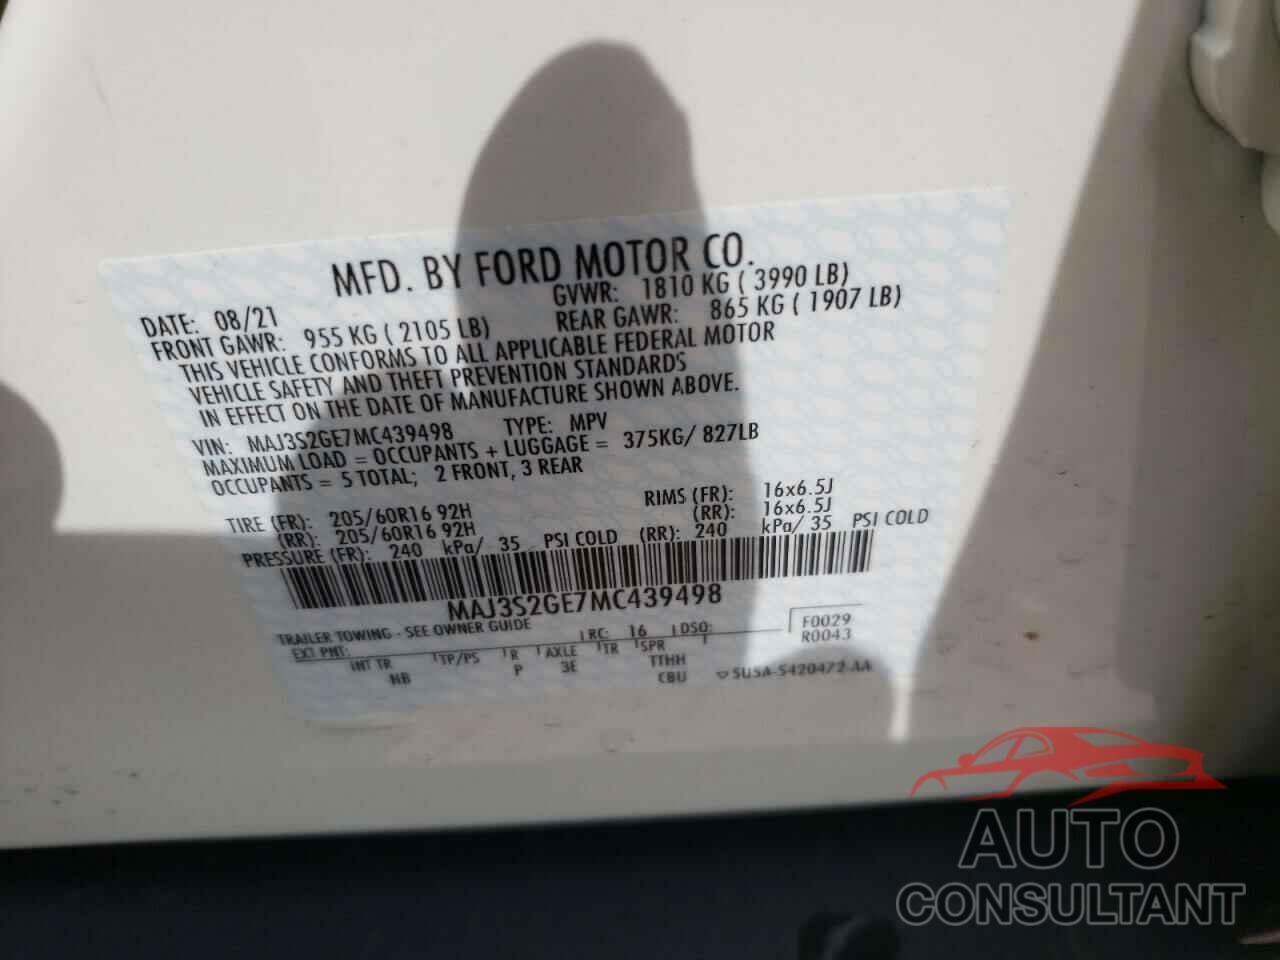 FORD ALL OTHER 2021 - MAJ3S2GE7MC439498